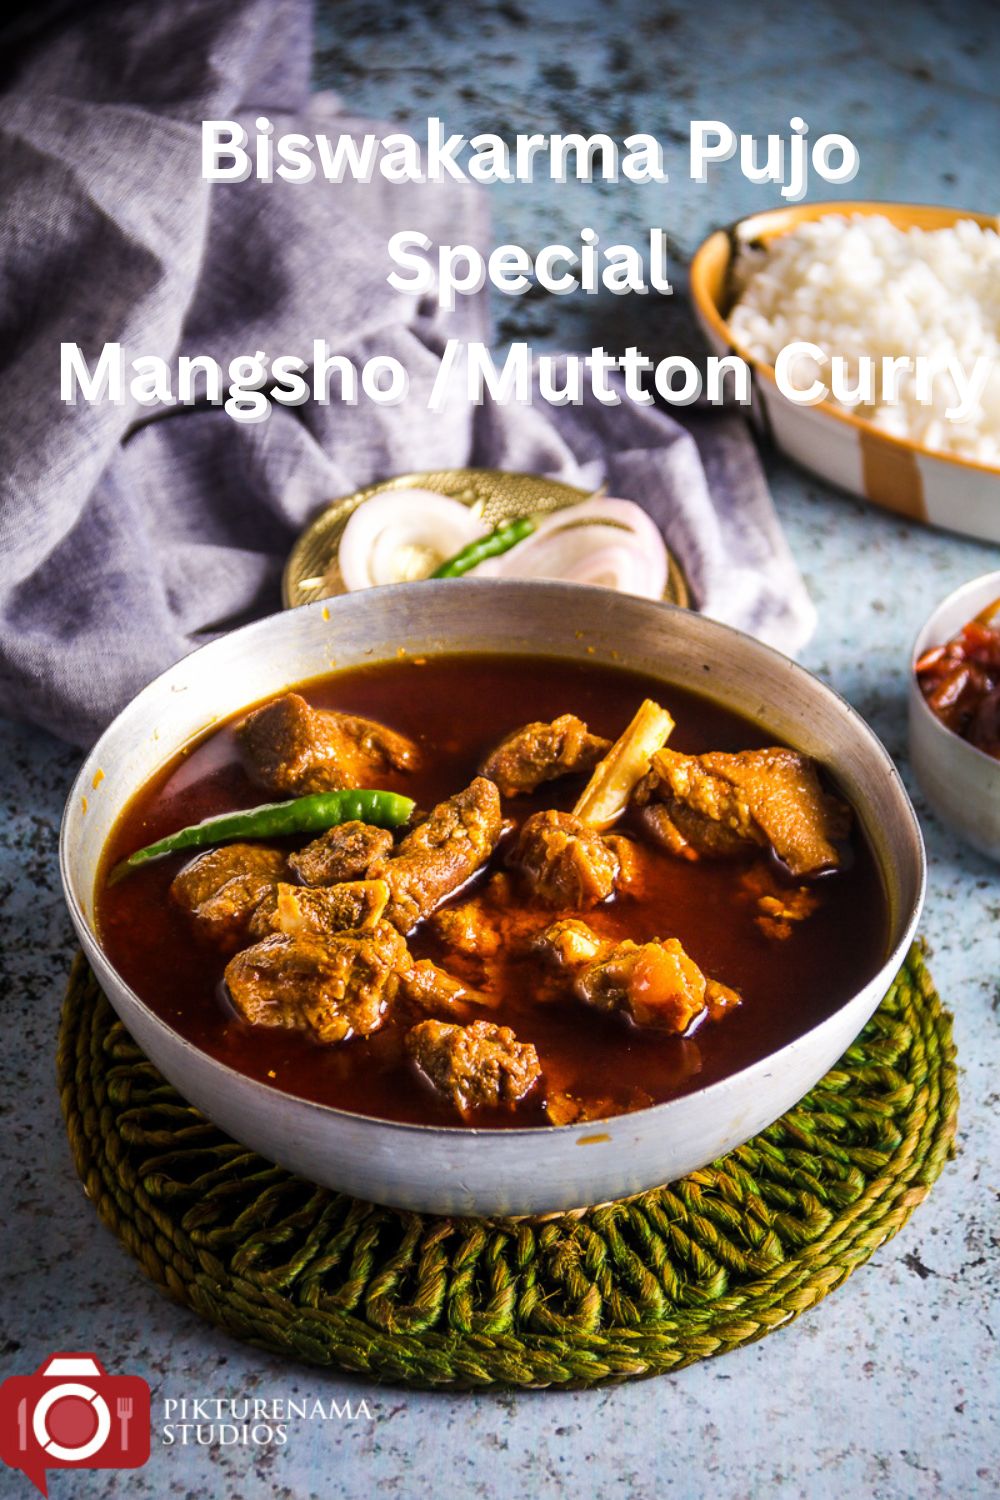 Biswakarma Pujo Special Mangsho /Mutton Curry - pin 